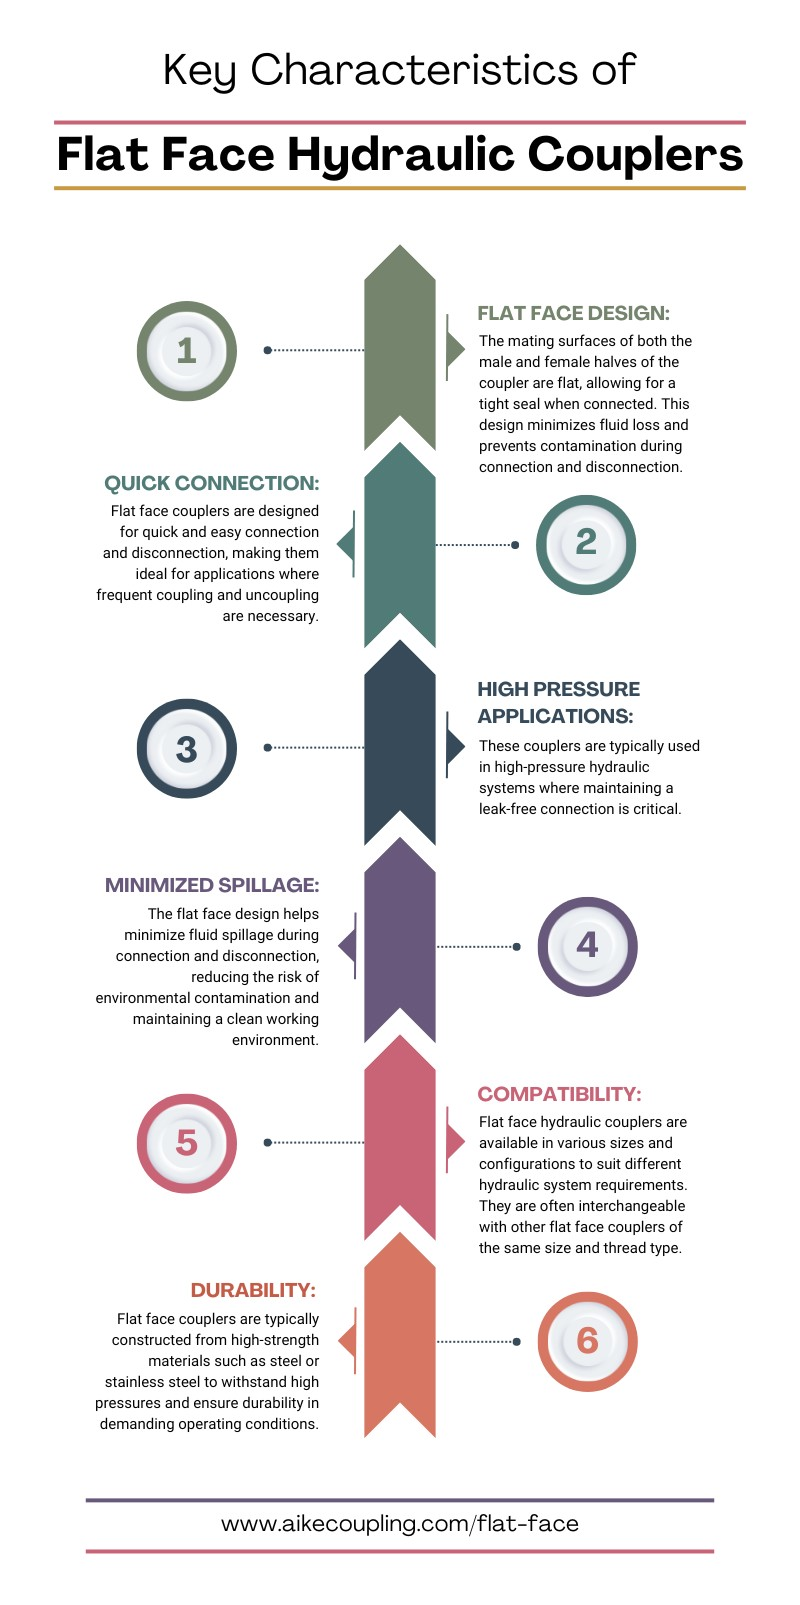 Key Characteristics of Flat Face Hydraulic Couplers [Infographic]